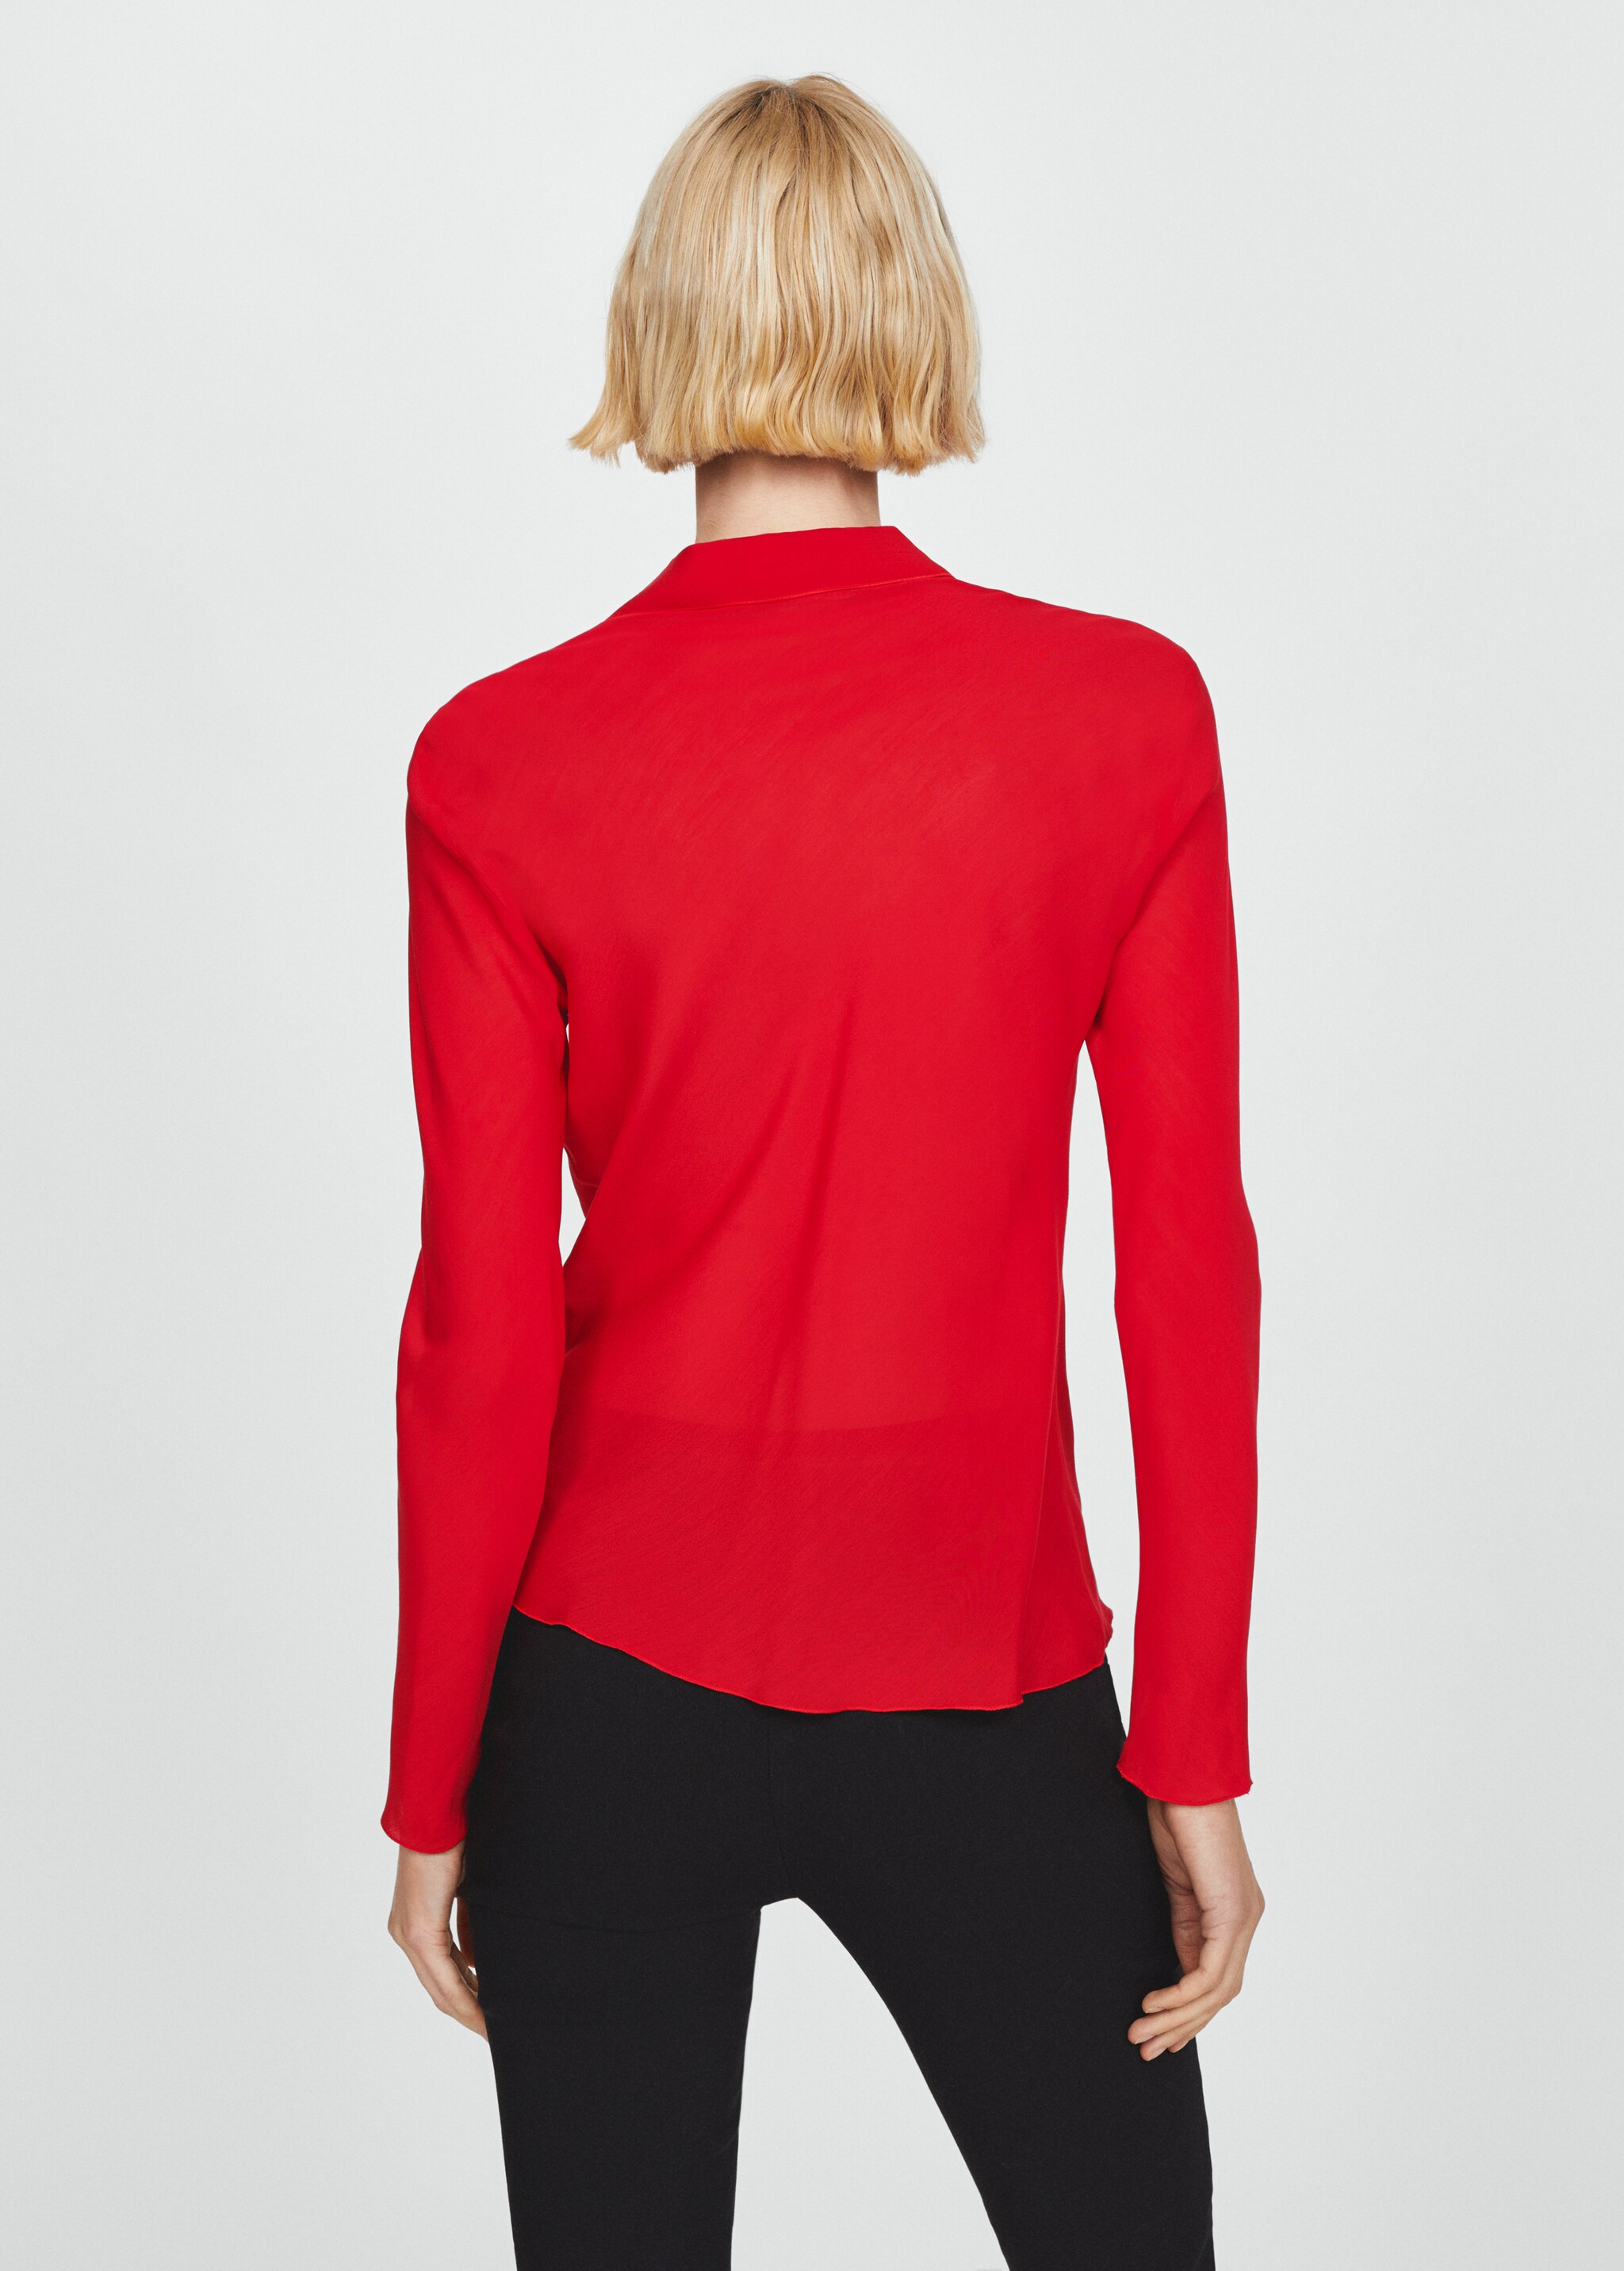 V-neck ruffle blouse - Reverse of the article